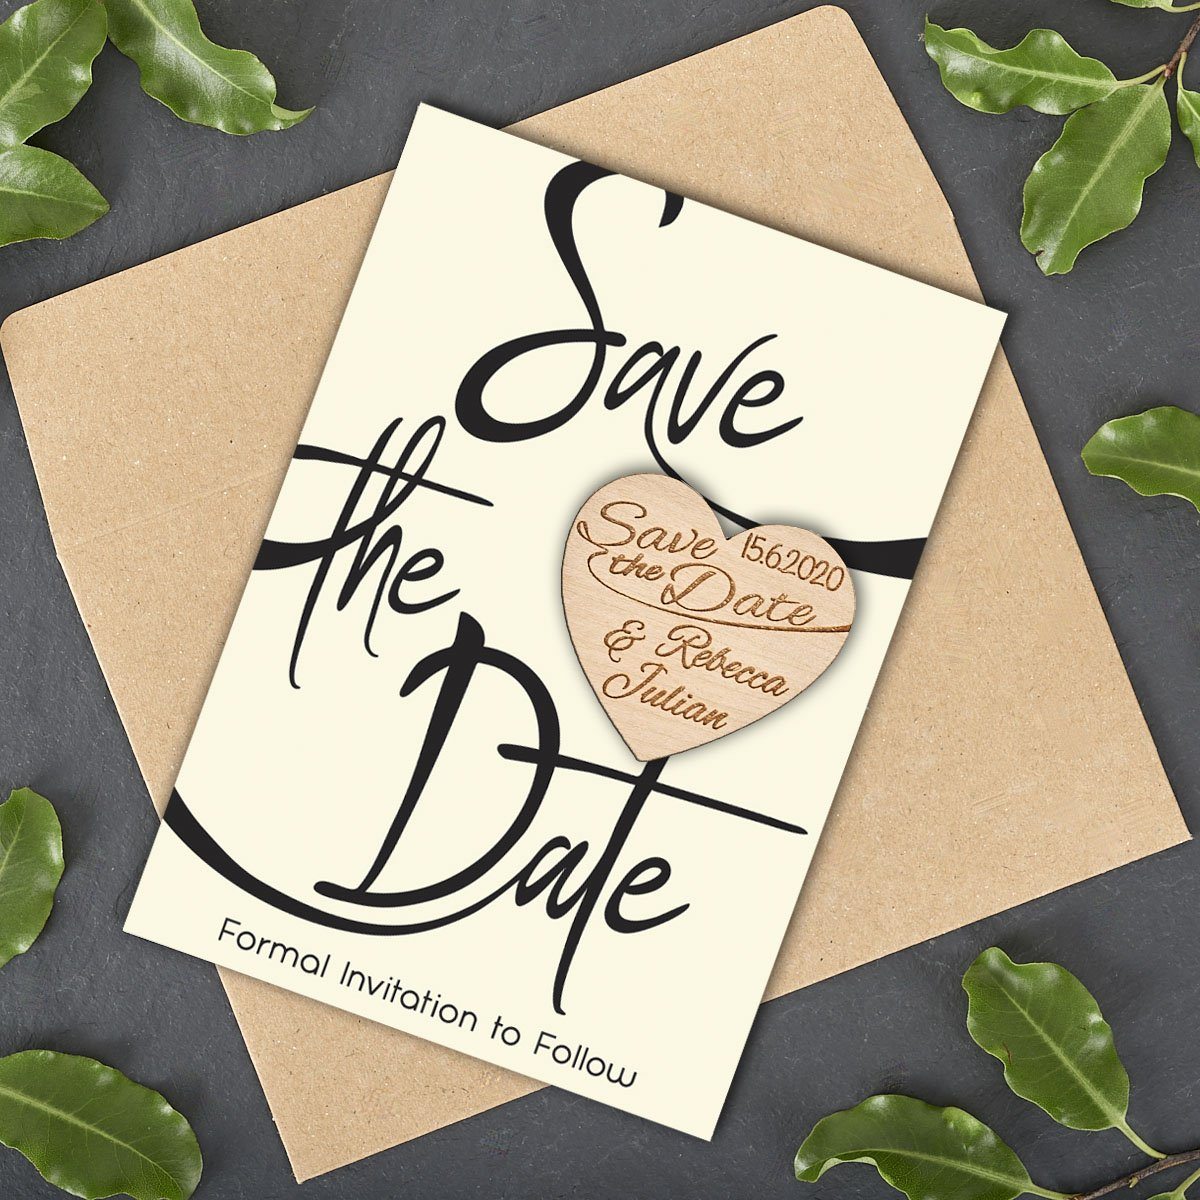 Save The Date Magnet With Cards - Save The Date Magnet Wooden Rustic - Simple Design